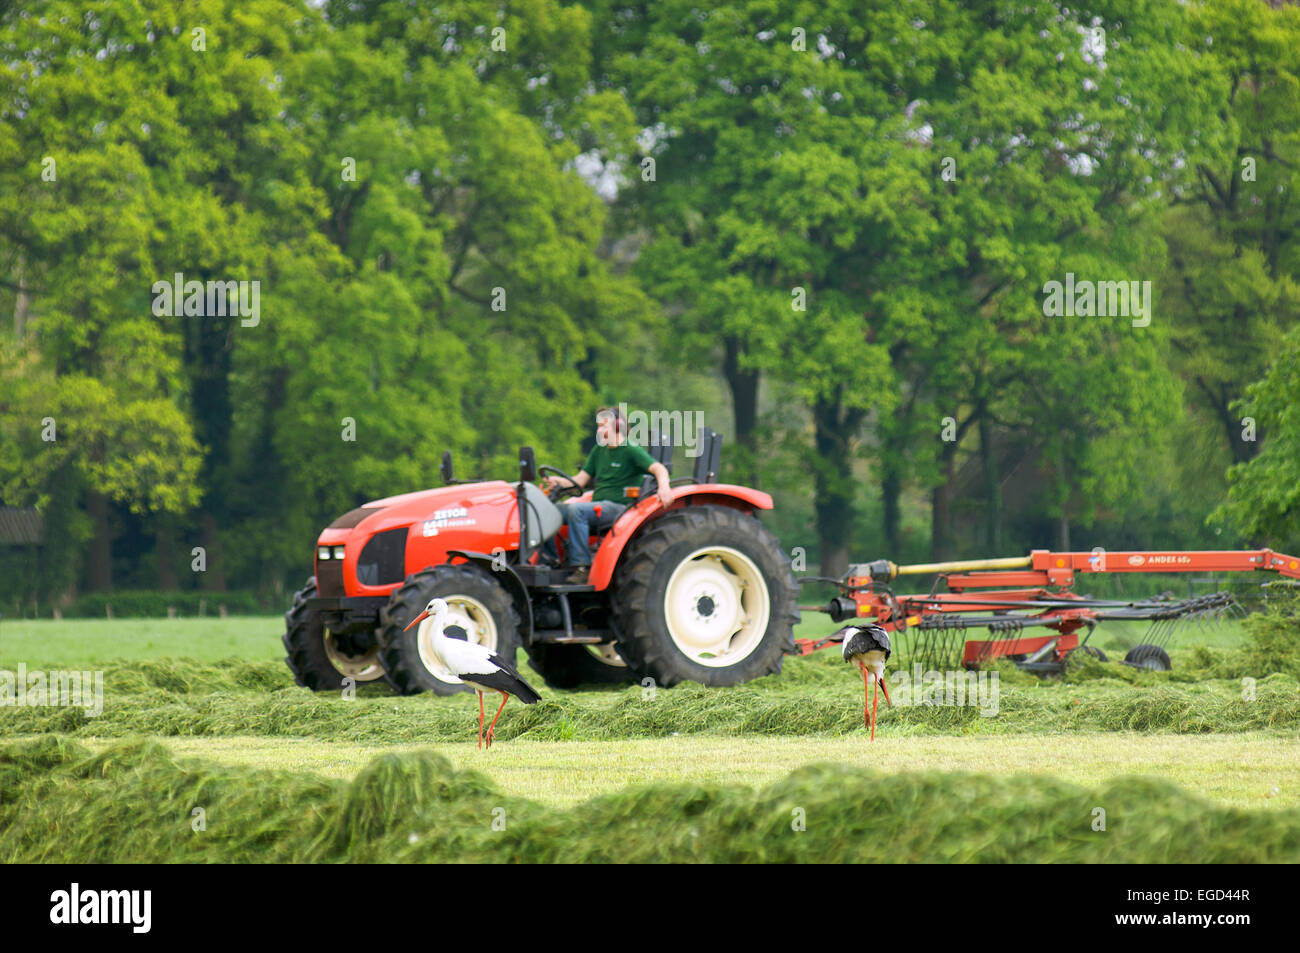 Two storks looking for food in places where a farmer on his tractor has been mowing the grass Stock Photo